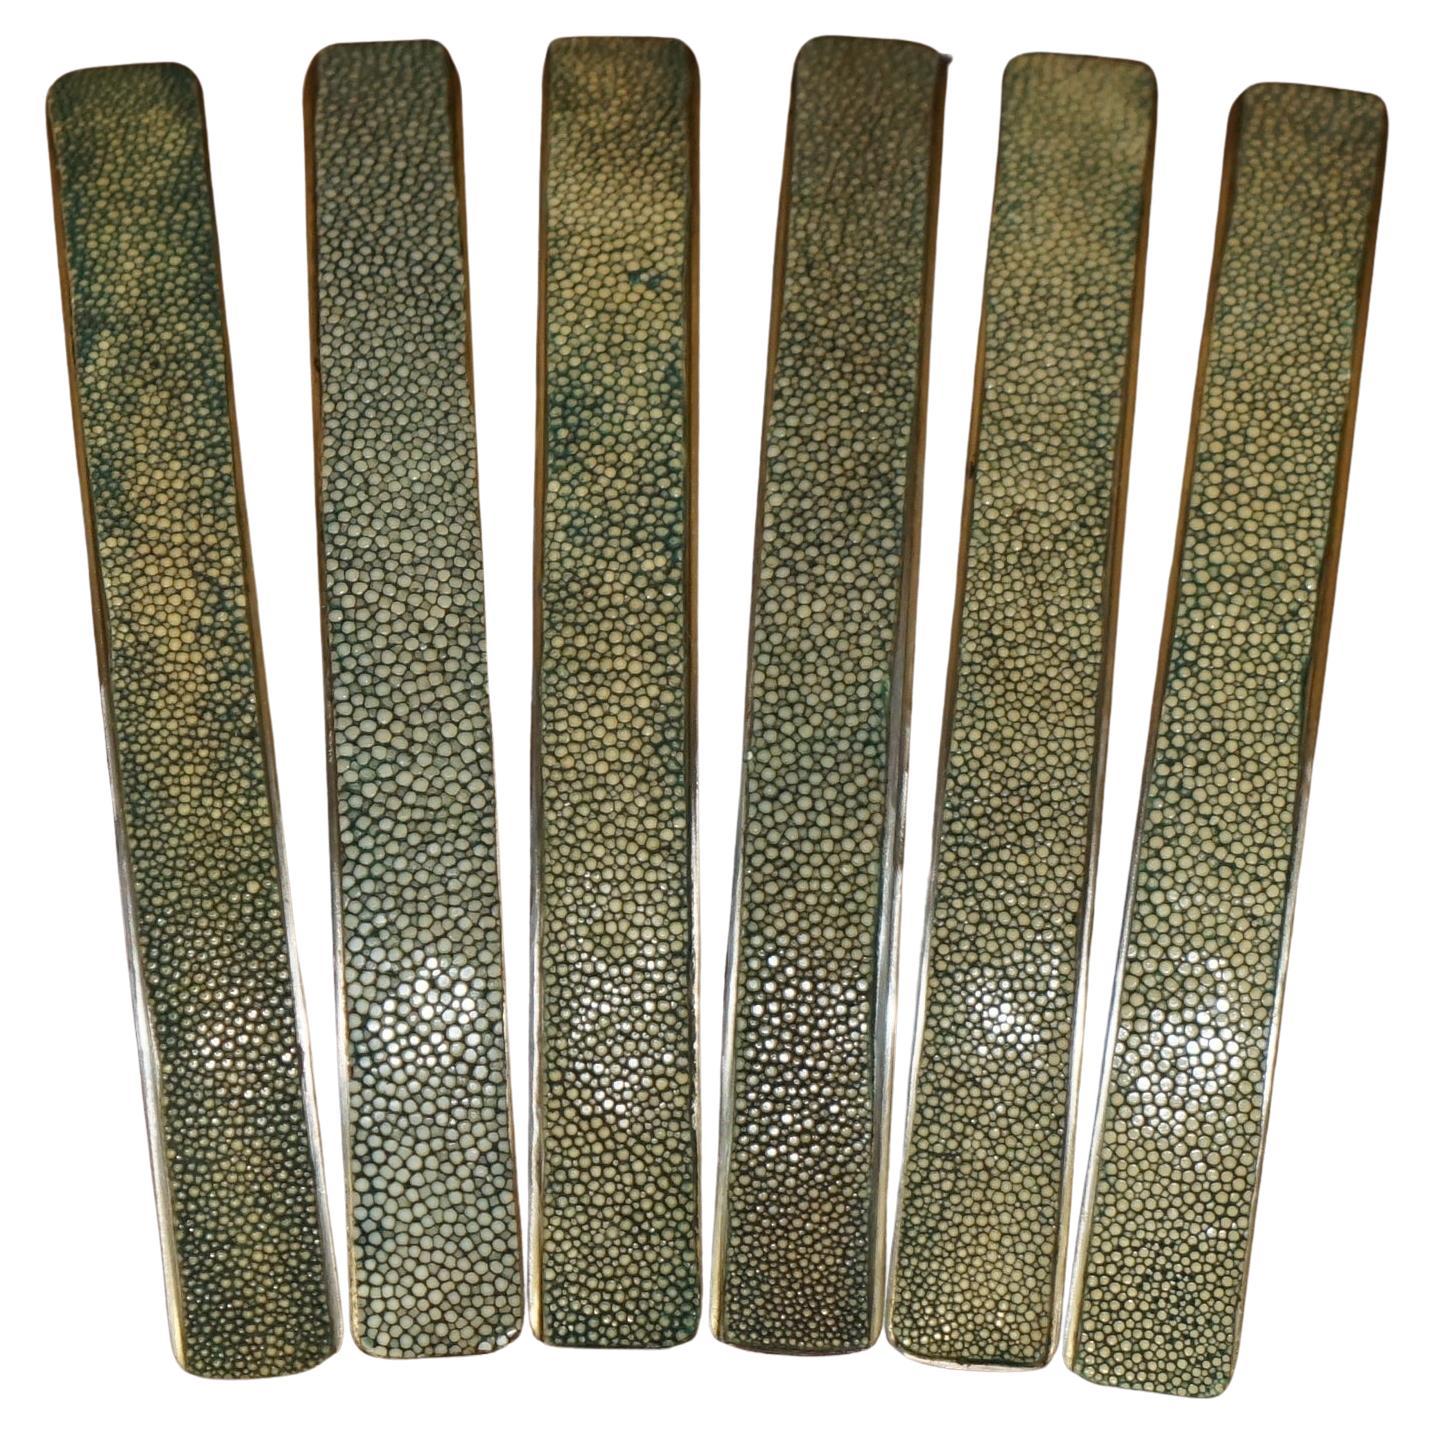 Royal House Antiques

Royal House Antiques is delighted to offer for sale this very rare suite of six Shagreen upholstered drawer handles

Shagreen is super collectable, it is basically manta ray or shark skin

I bought these with a view to using